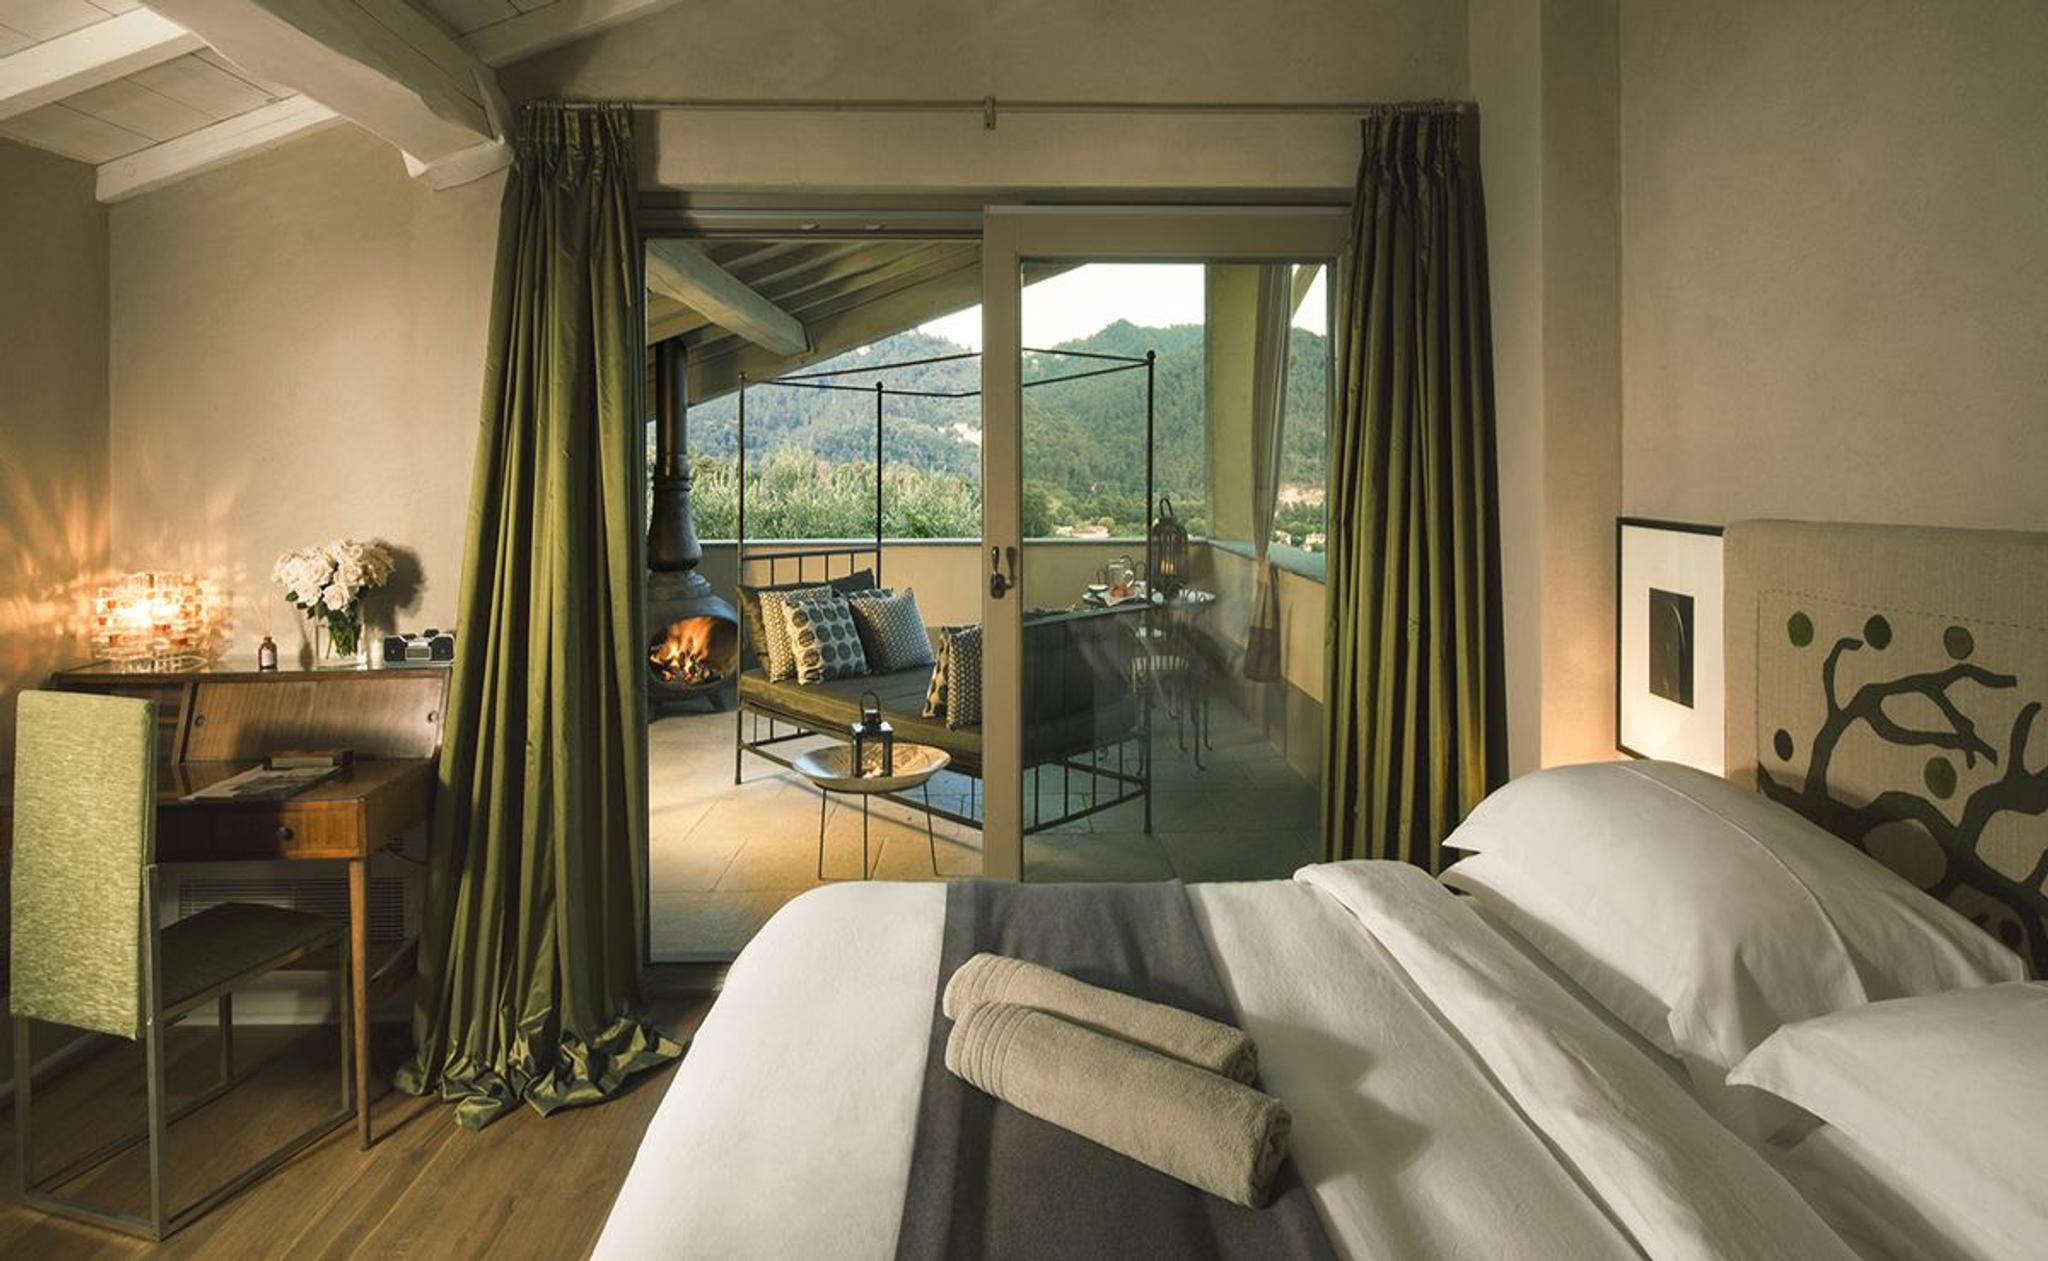 The Inn represents the perfect weekend retreat.